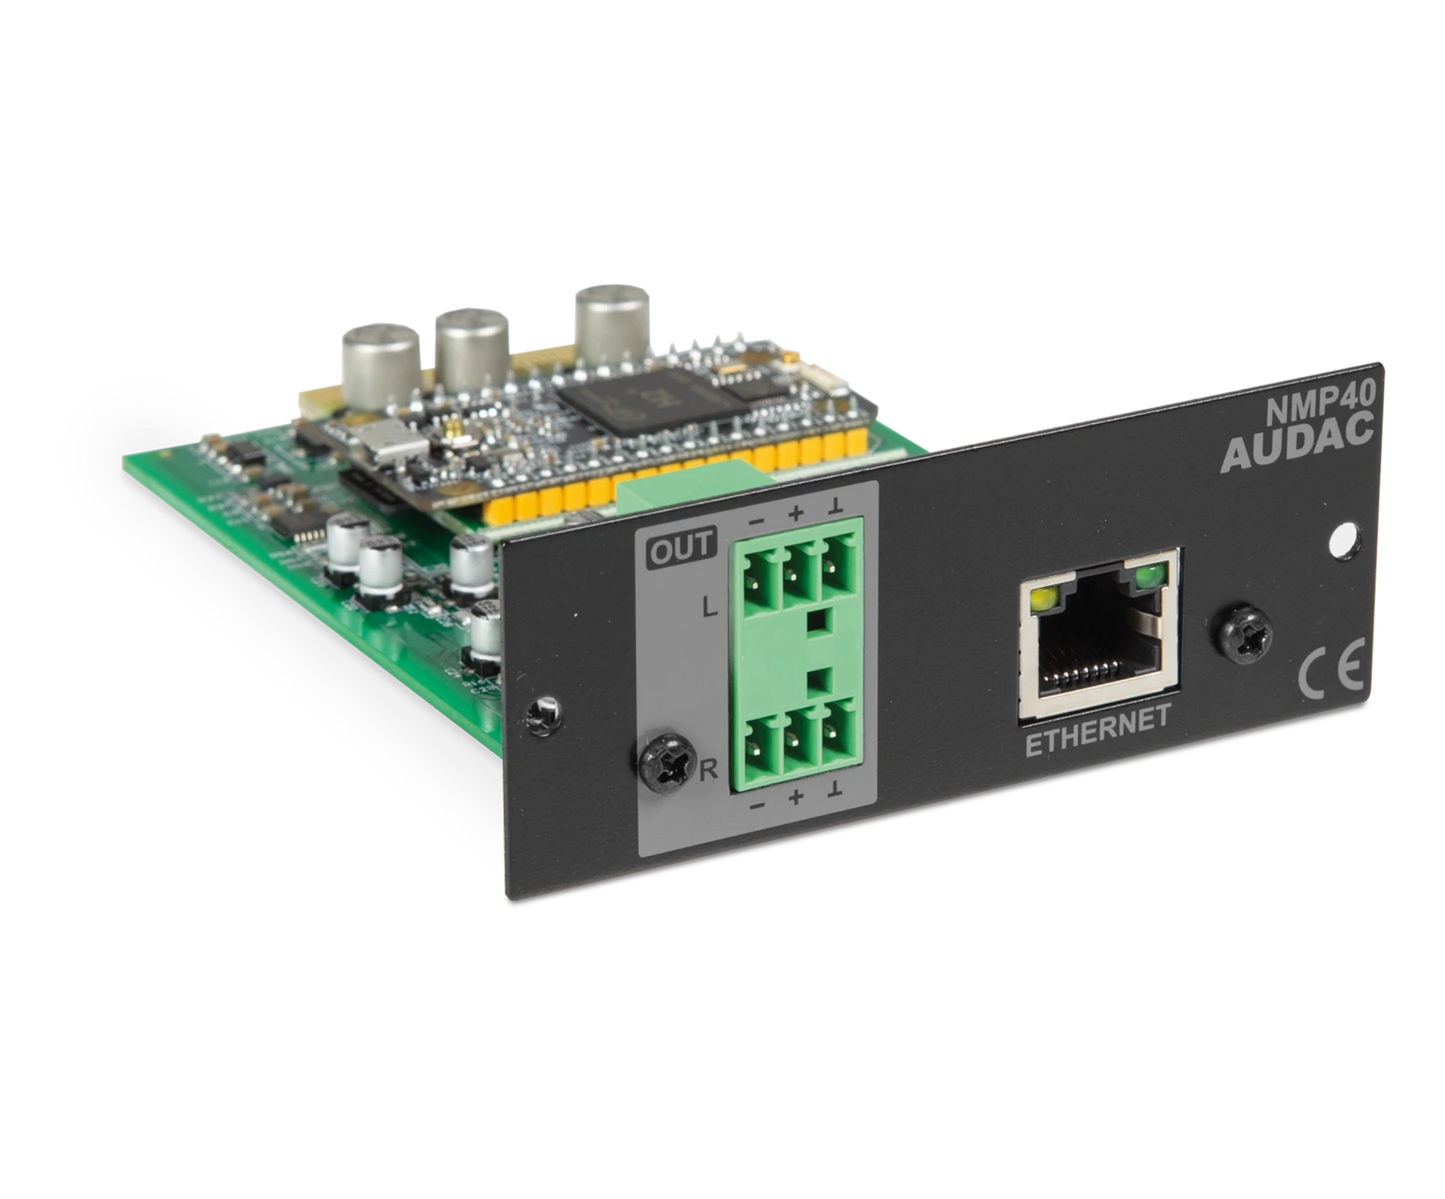 NMP40 Audio Streaming Sourcecon™ Module